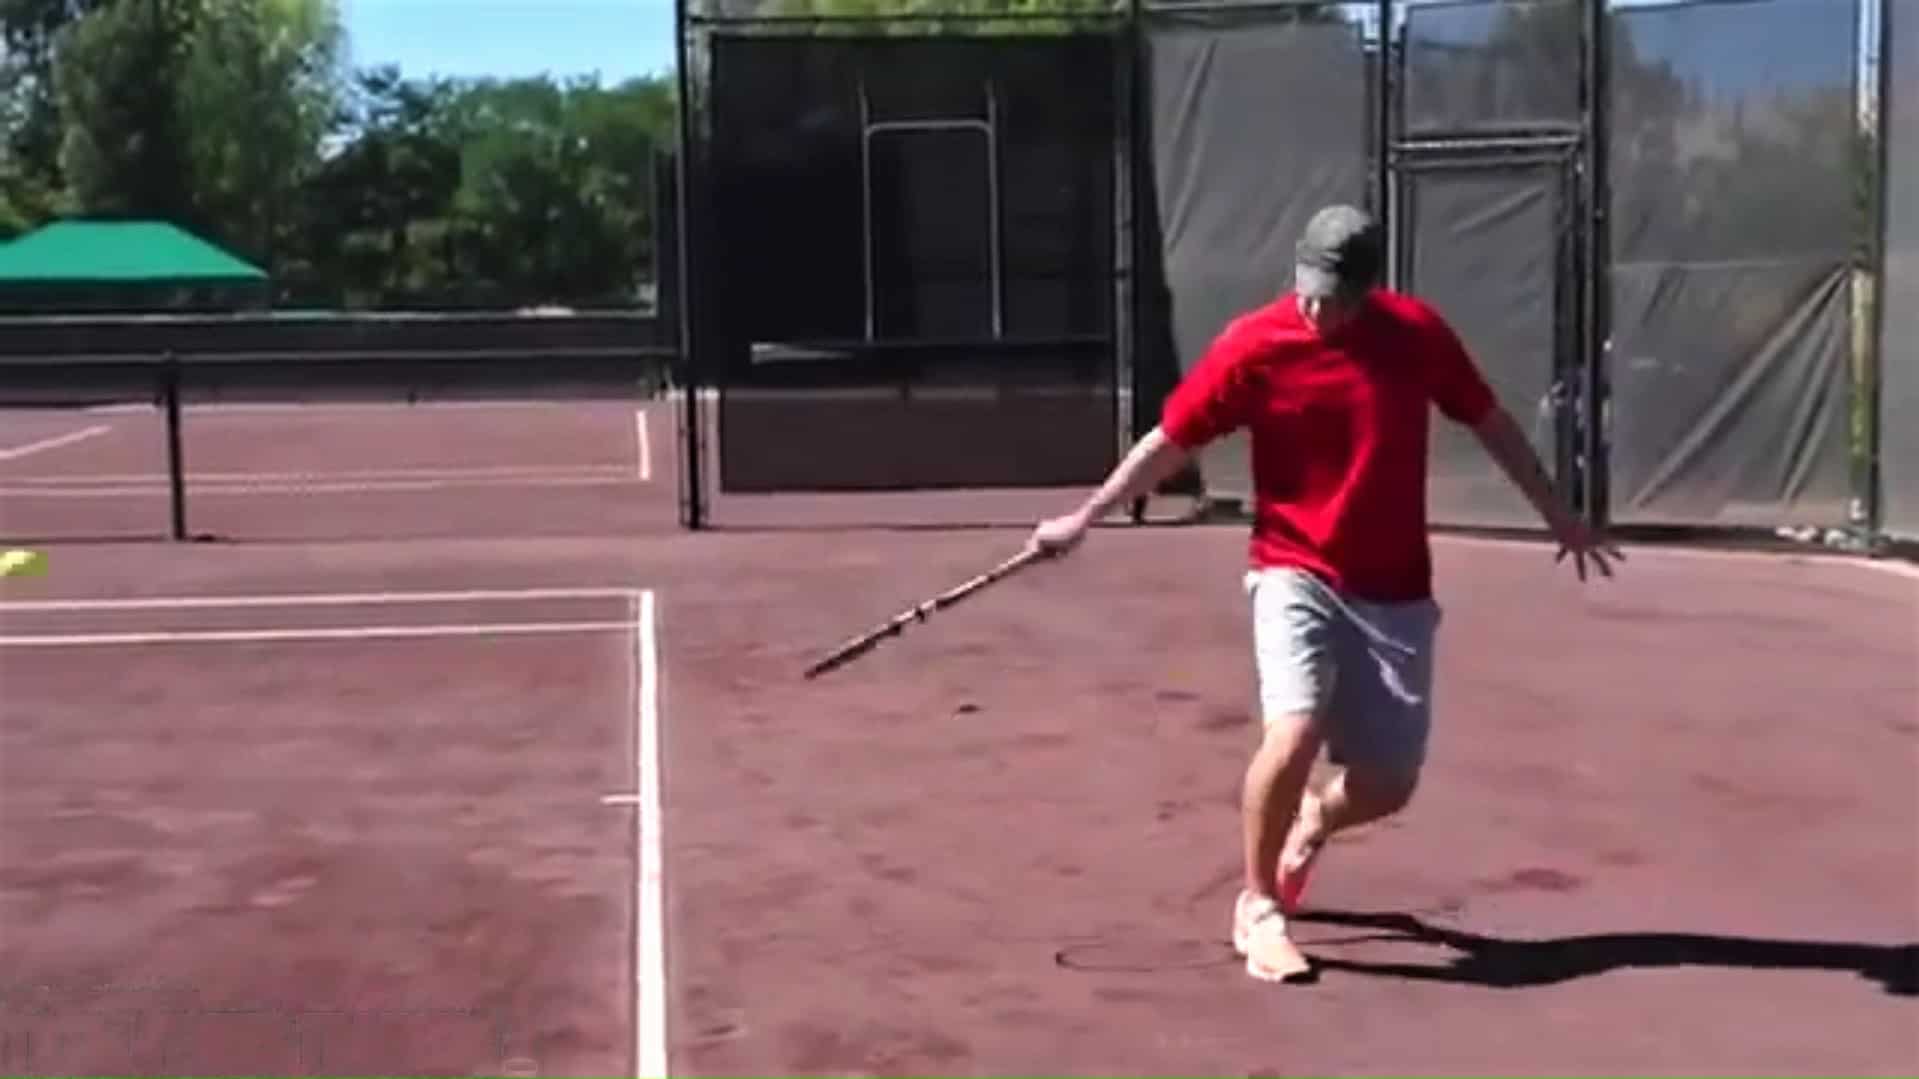 A tennis player demonstrating a one-handed tennis backhand slice follow through.